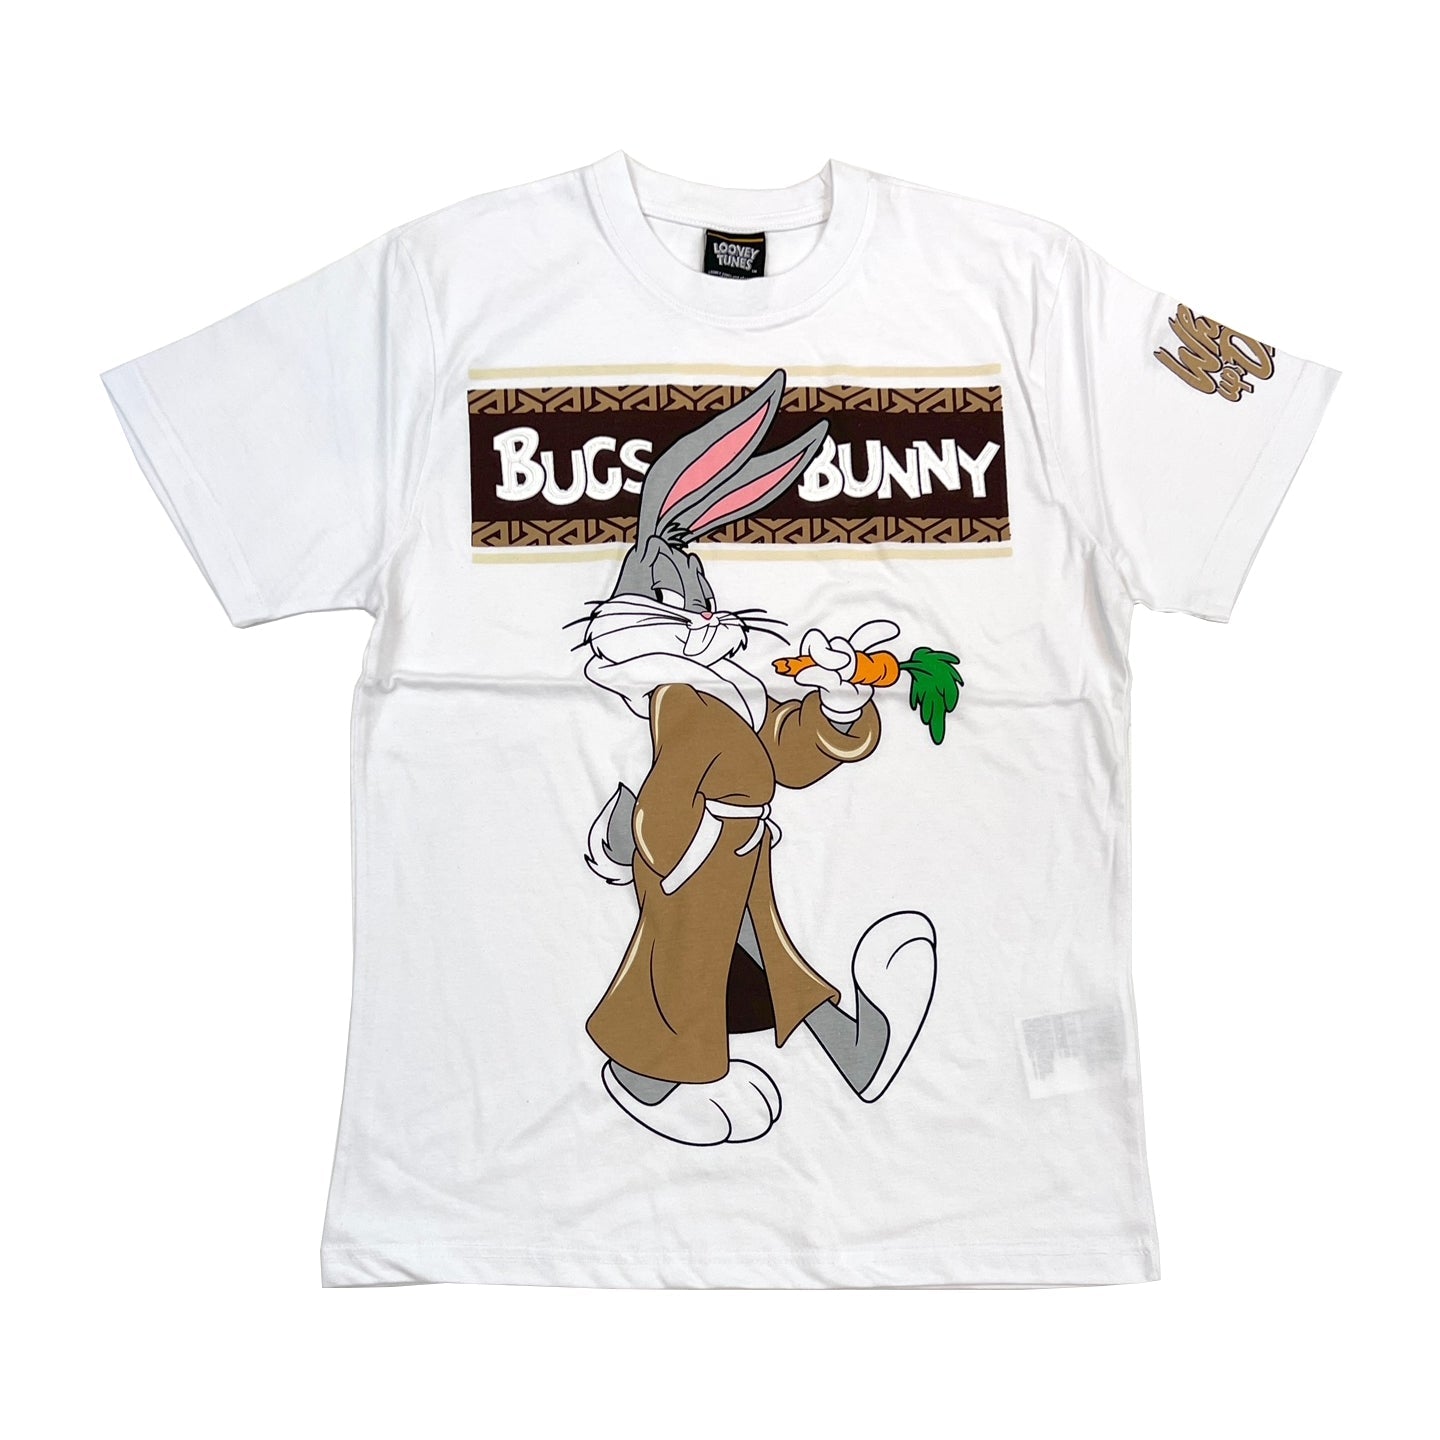 Looney Tunes 2 Tee / $16.99 Bunny for Bugs (White) $30